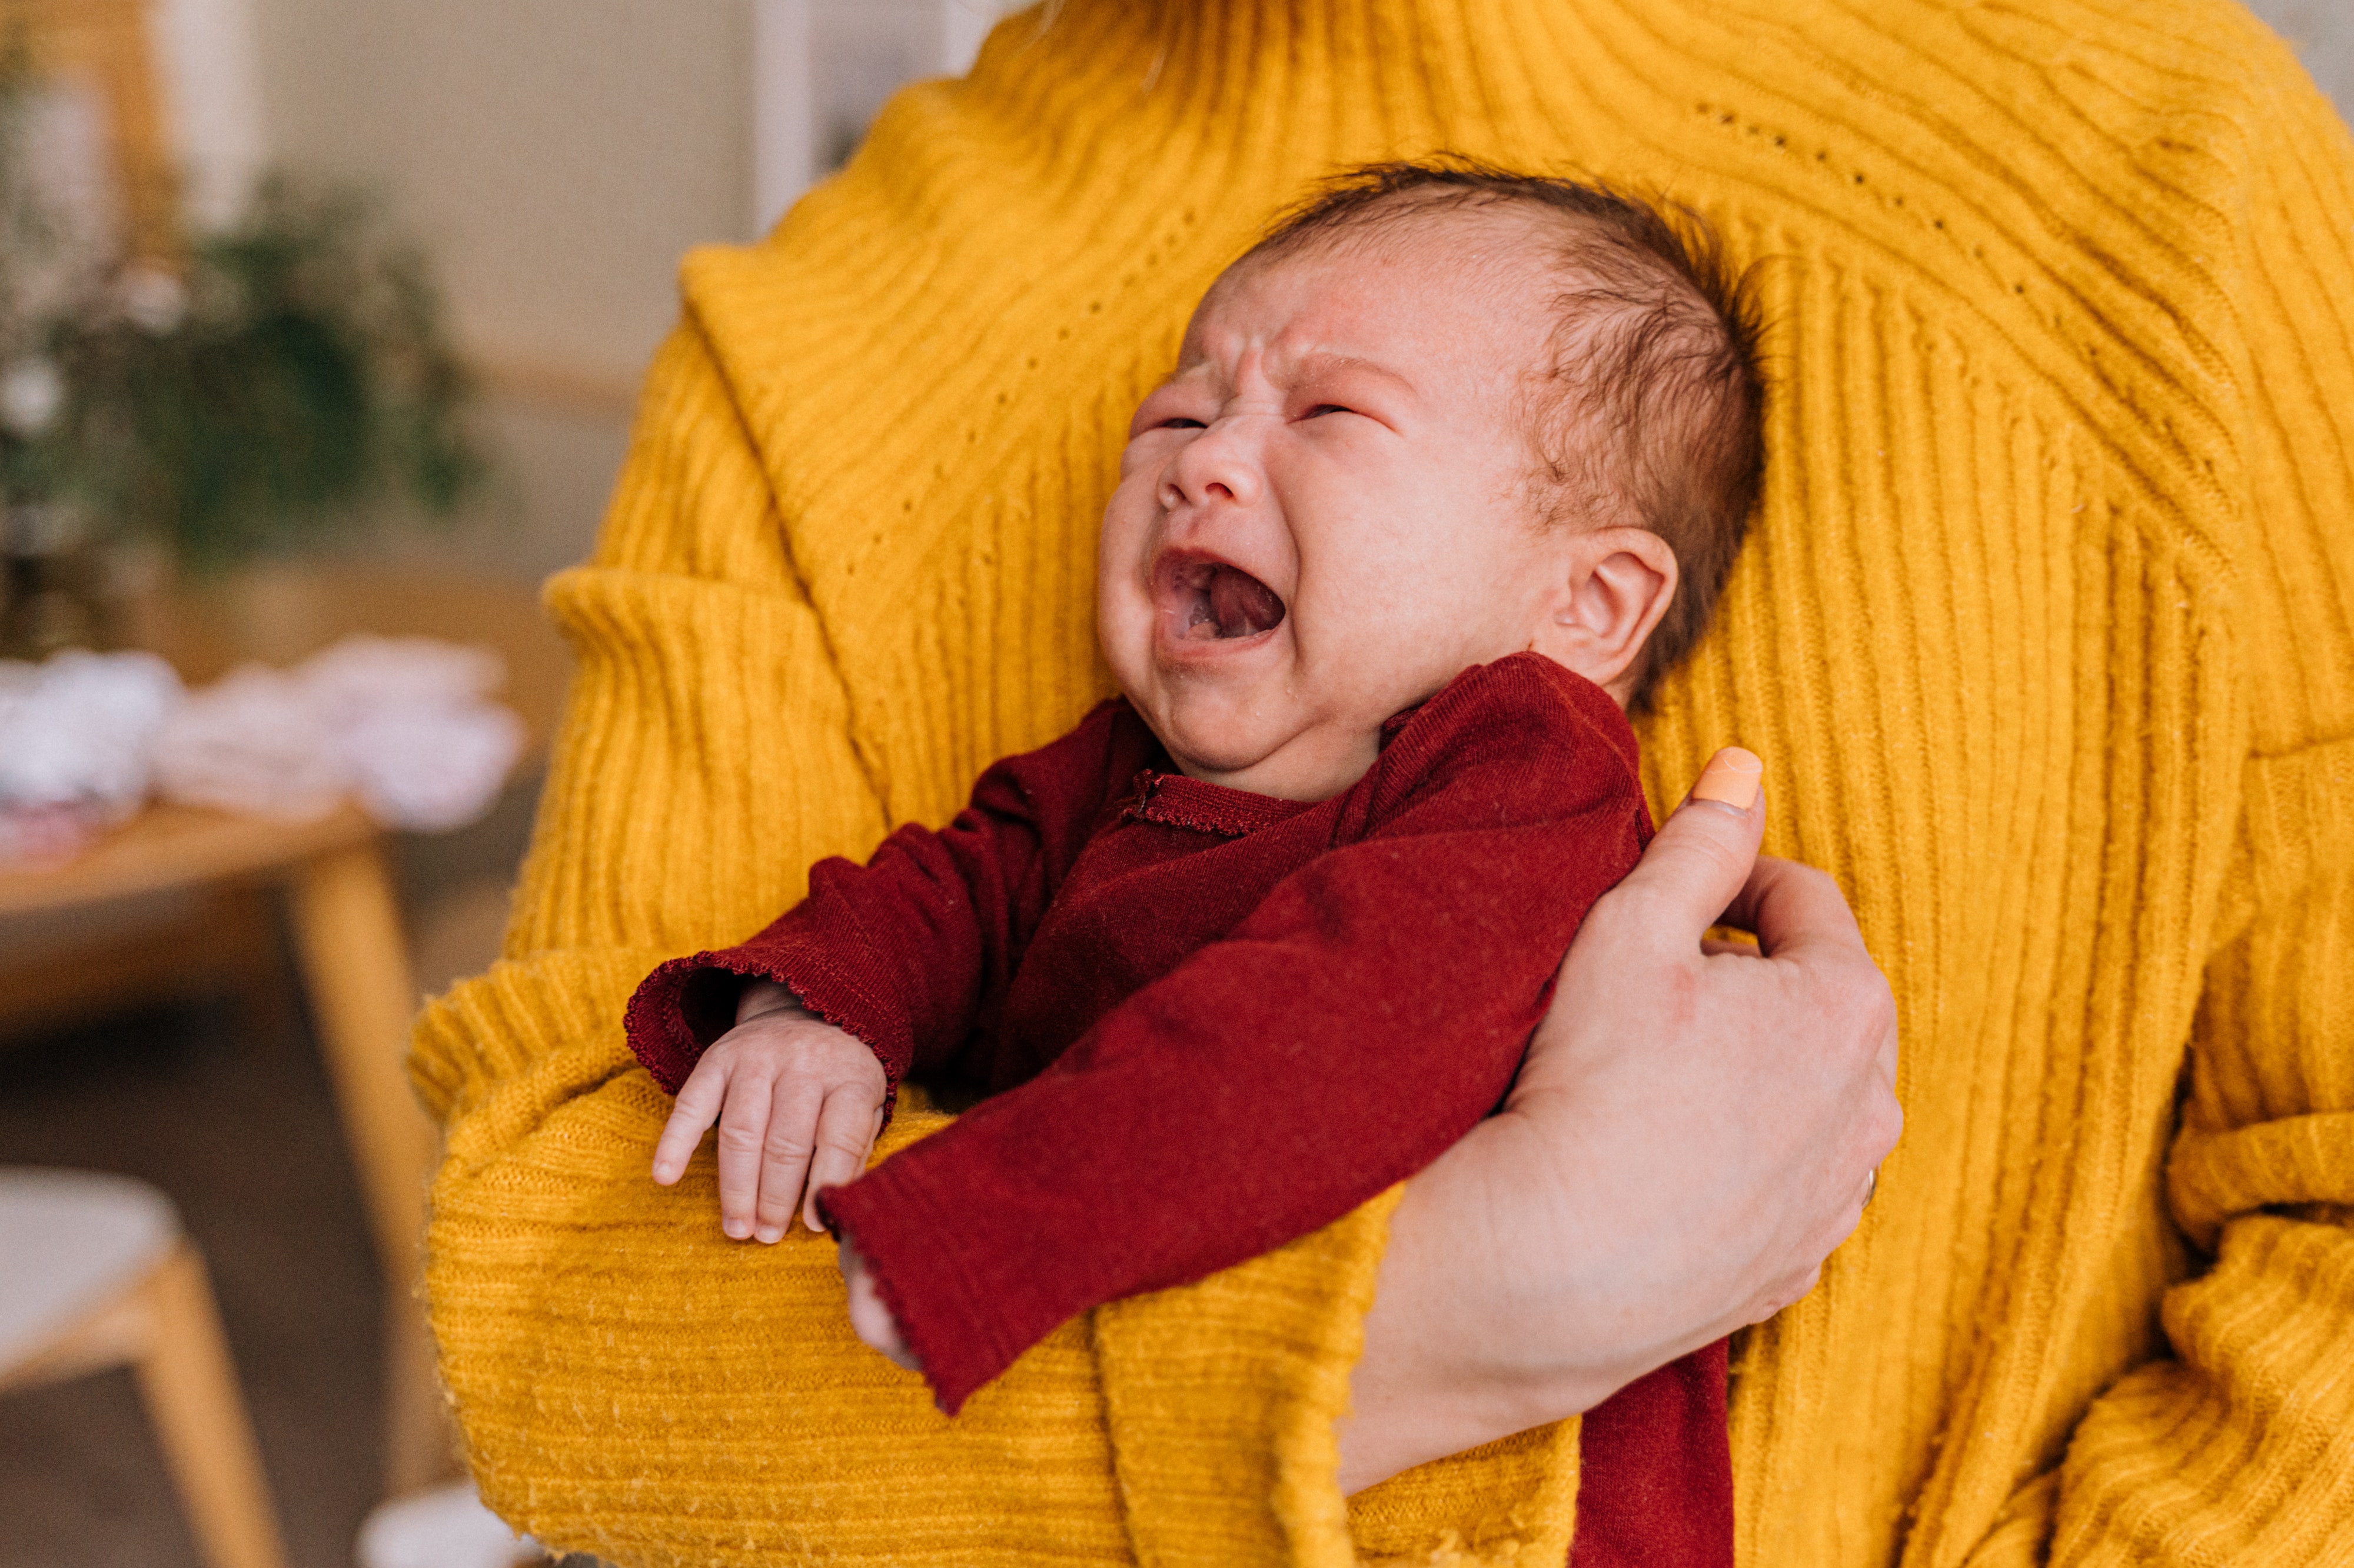 5 Shockingly 'Evil' Things Your Adorable Baby Might Be Doing